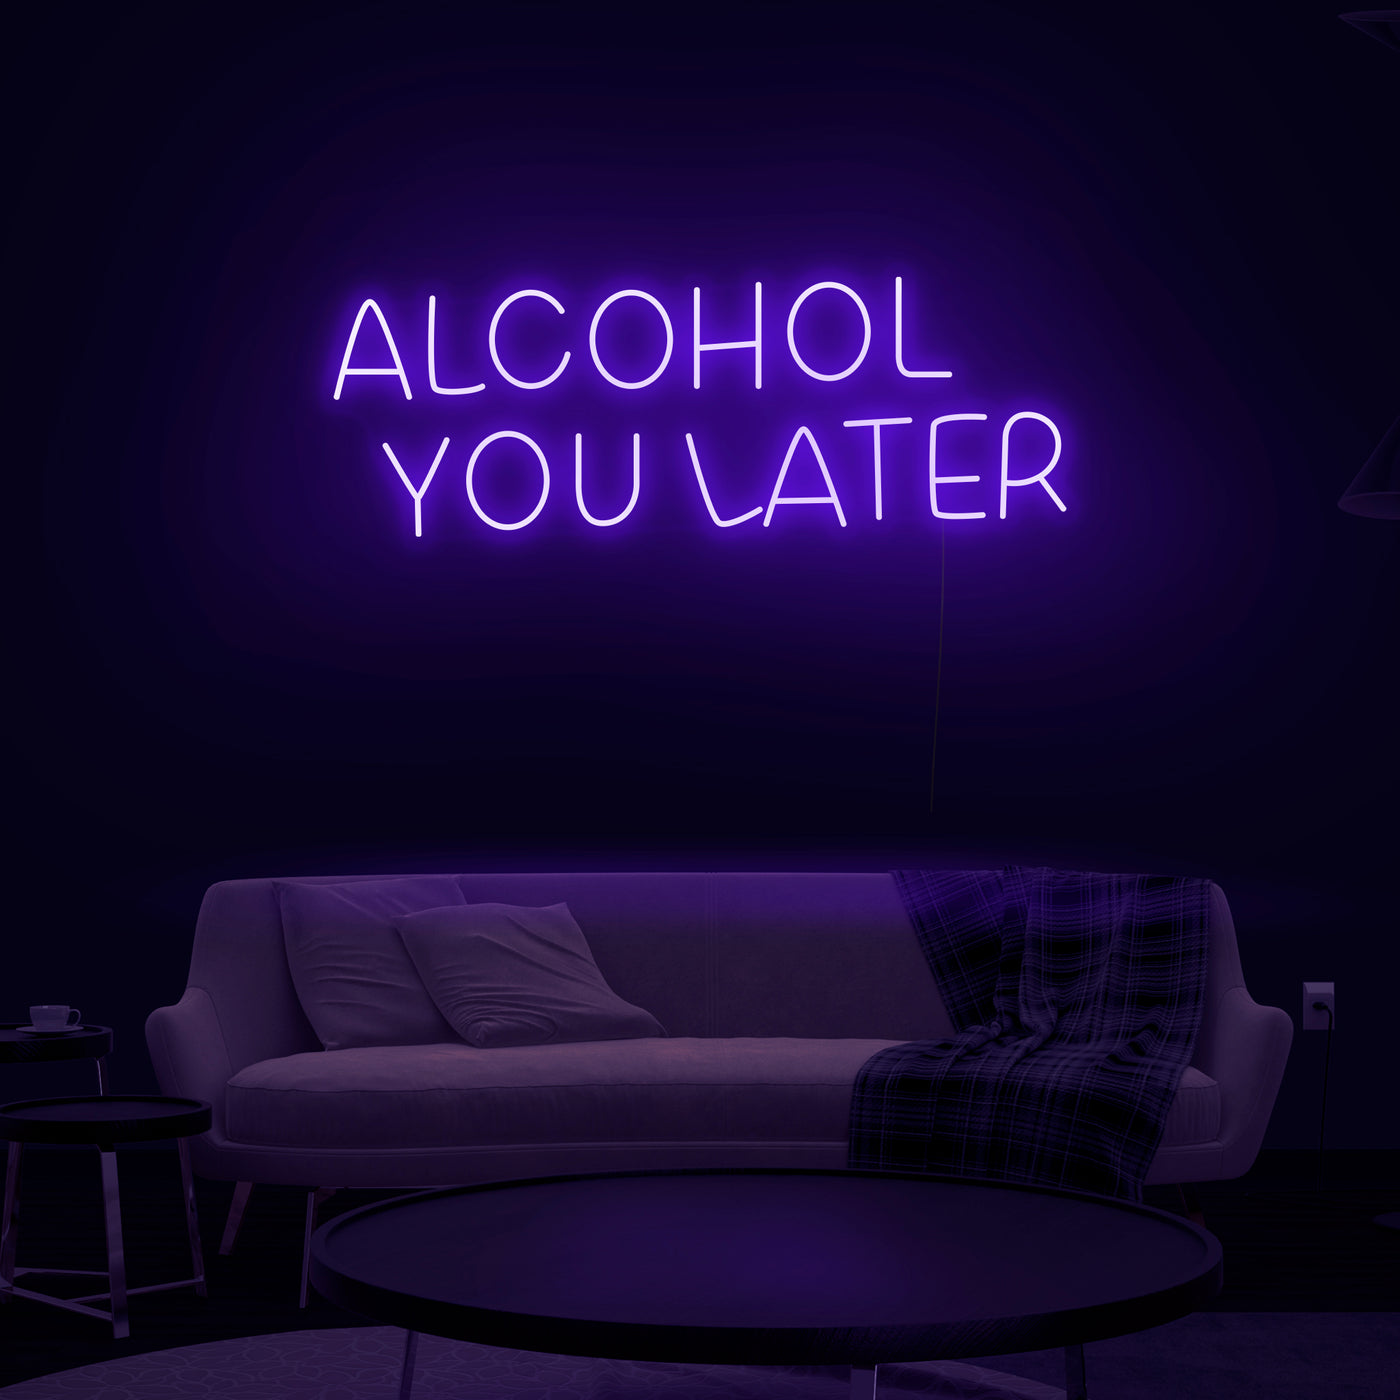 'Alcohol You Later' Neon Sign - Nuwave Neon